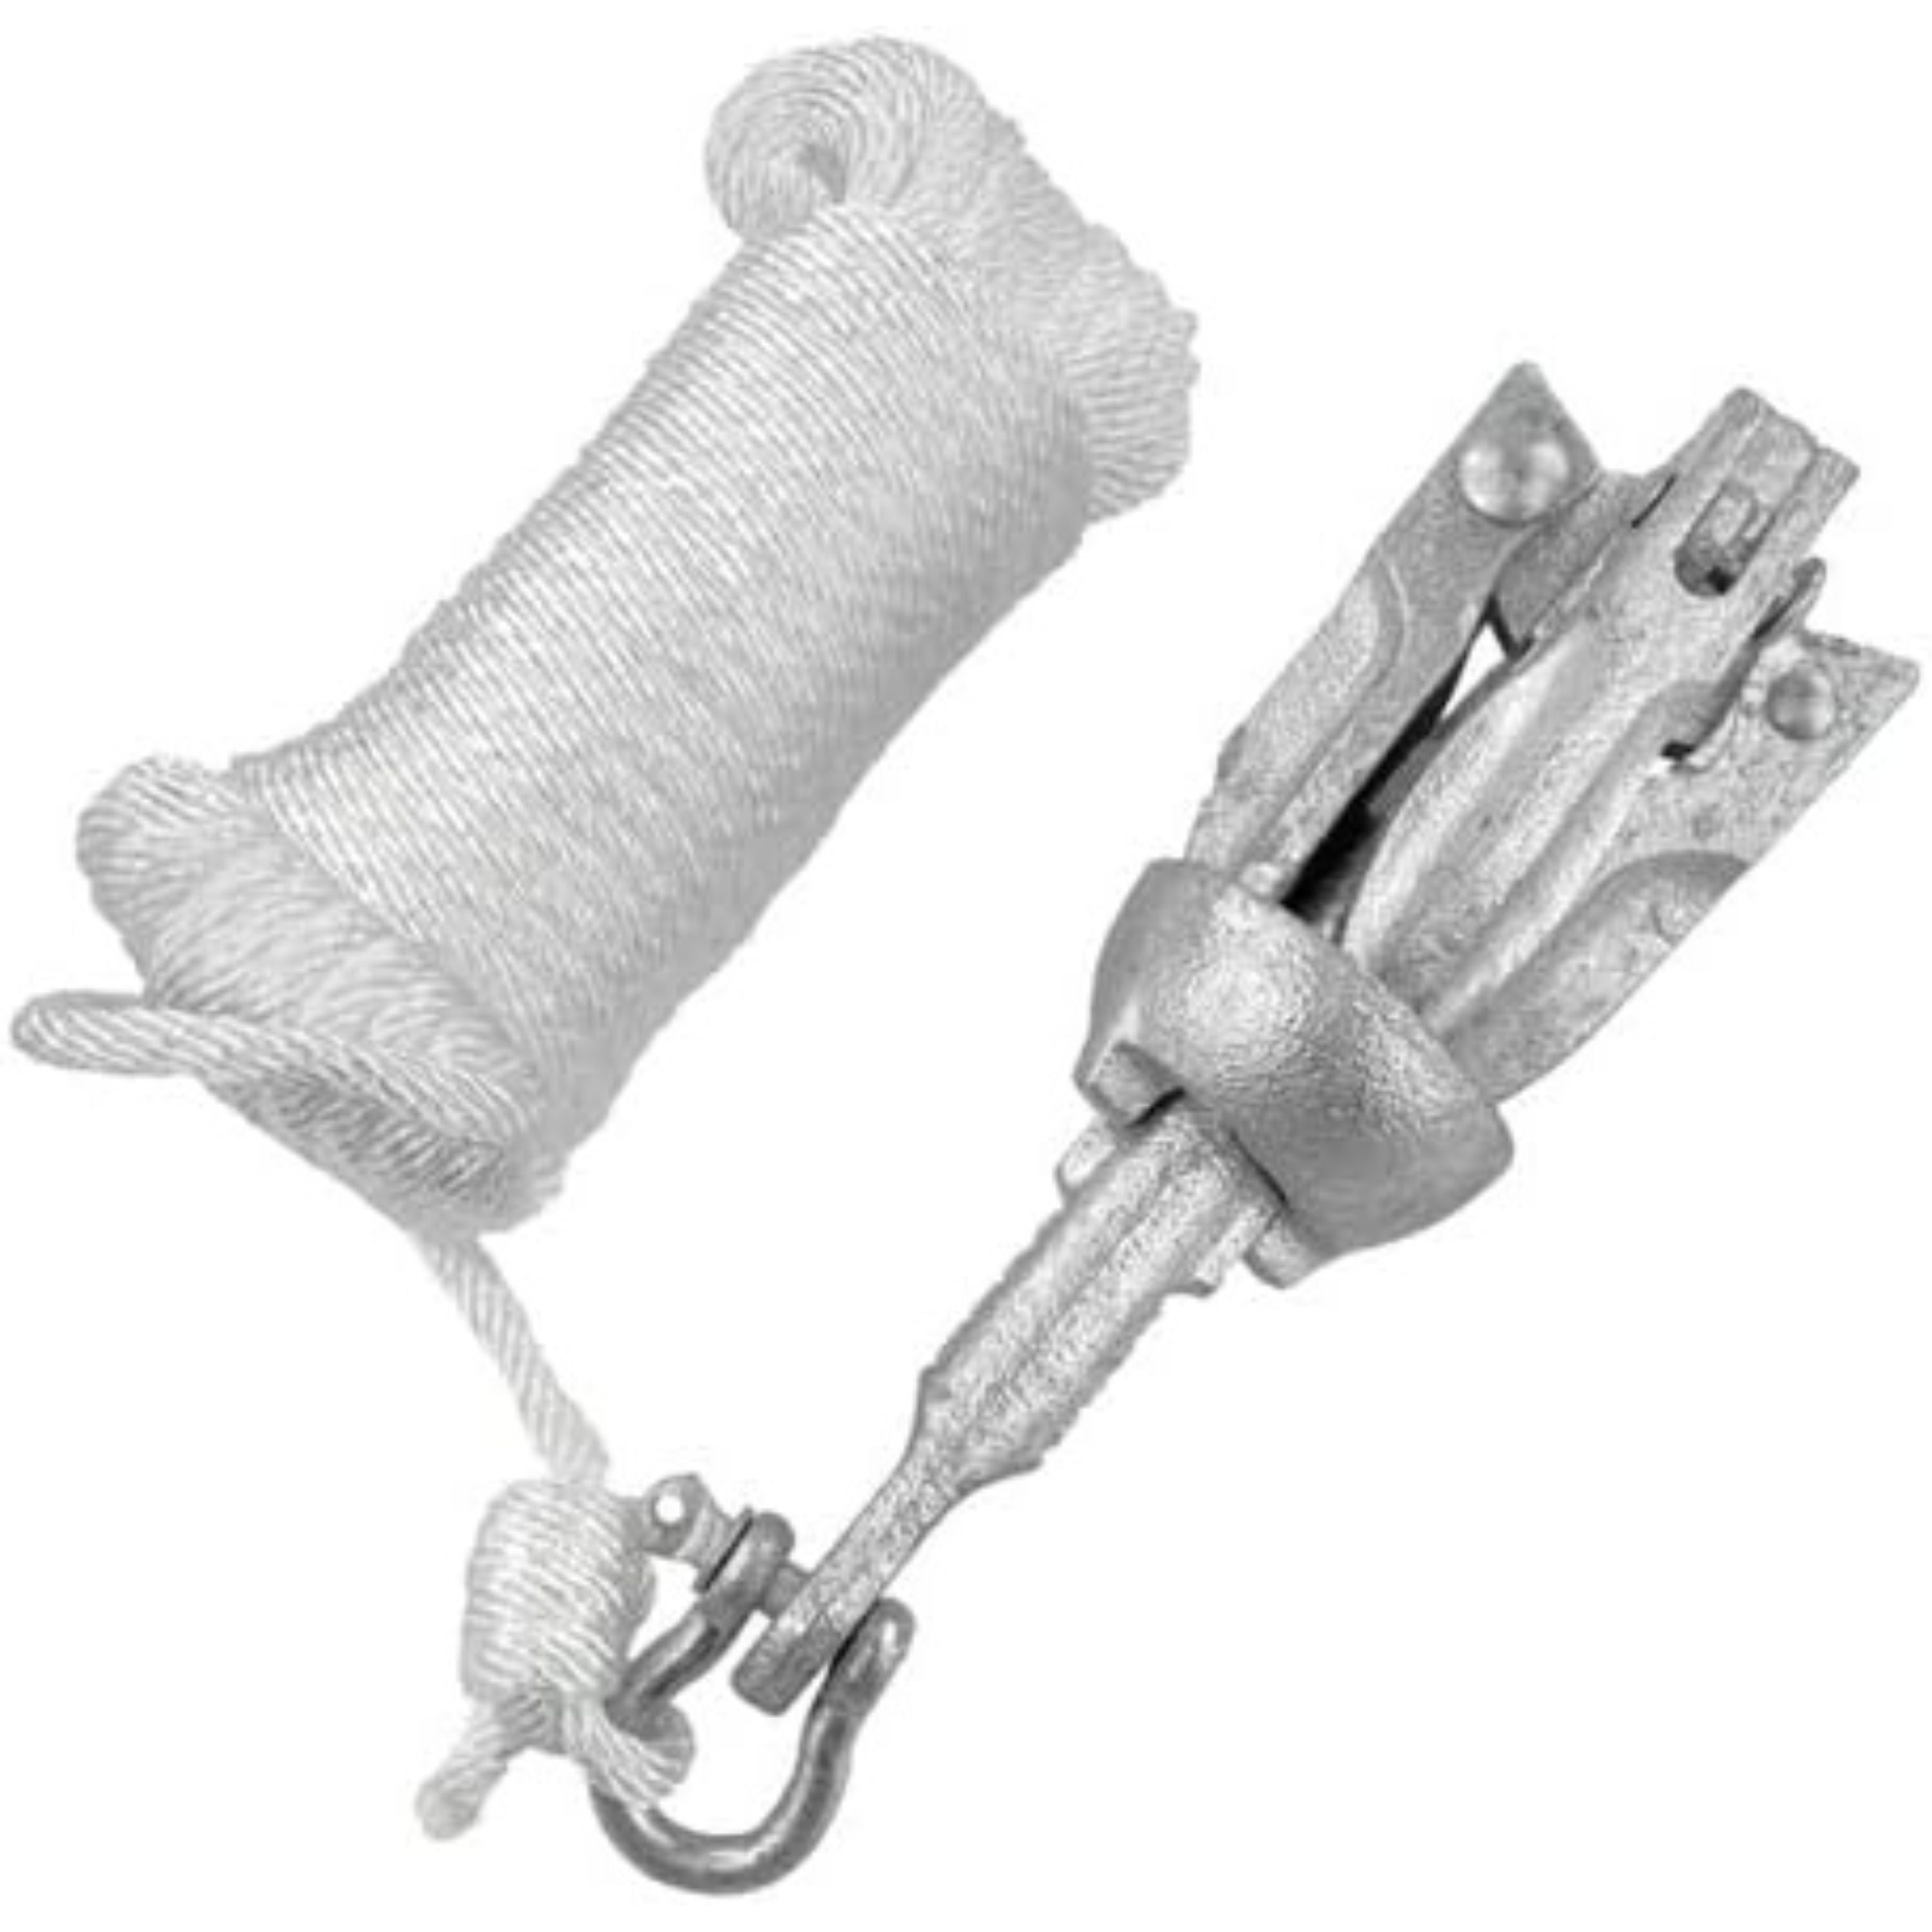 Folding anchor kit 1.5 lbs with 30 ft line